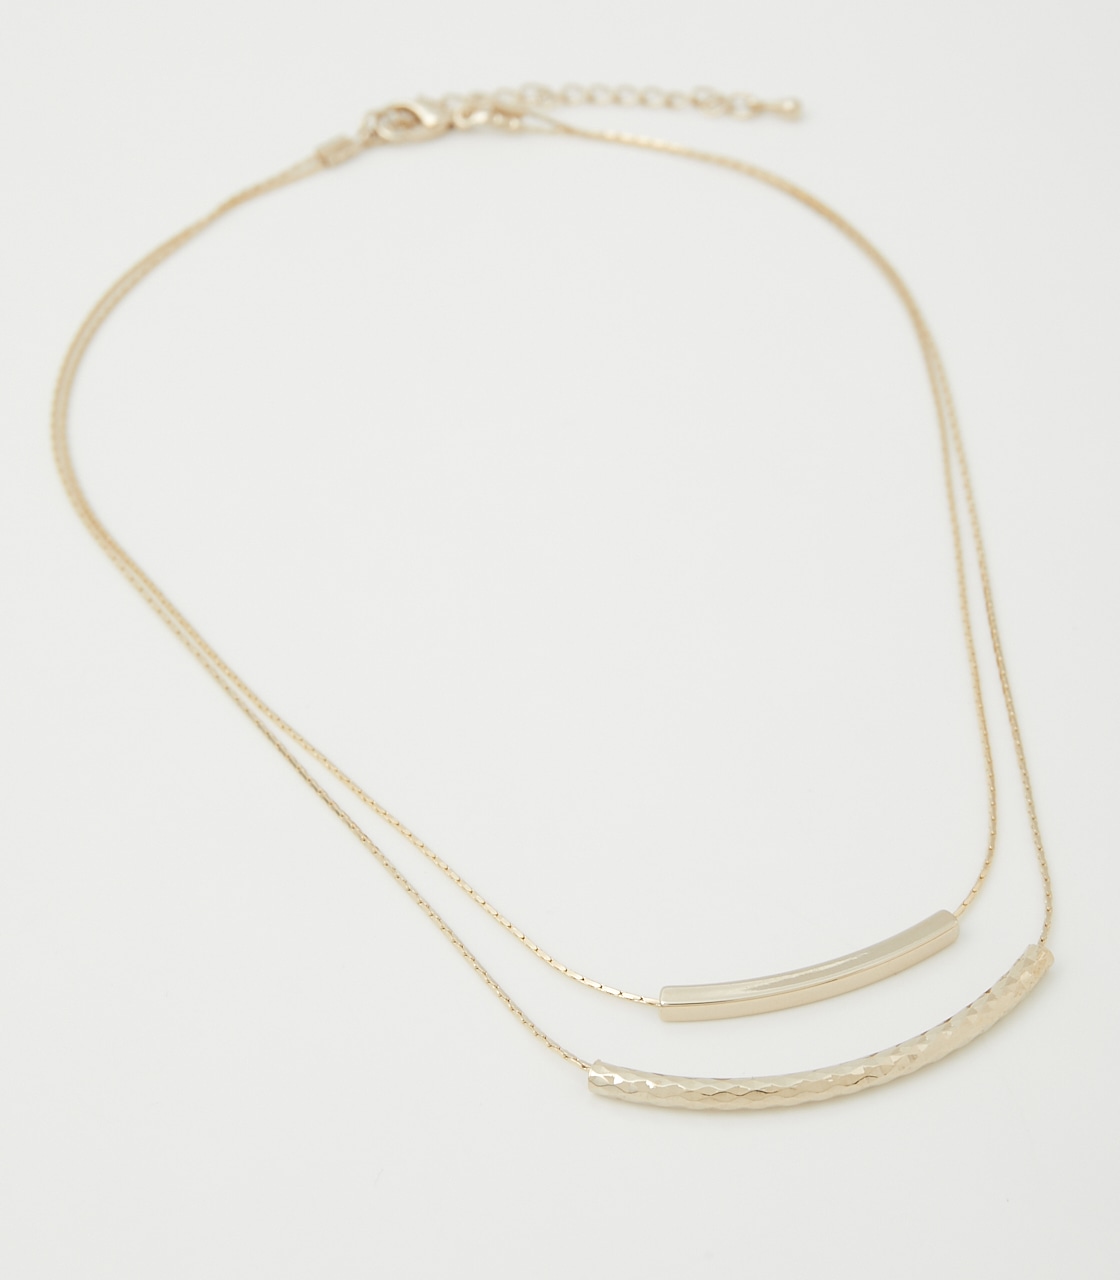 DOUBLE CHAIN PIPE NECKLACE/ダブルチェーンパイプネックレス 詳細画像 L/GLD 2